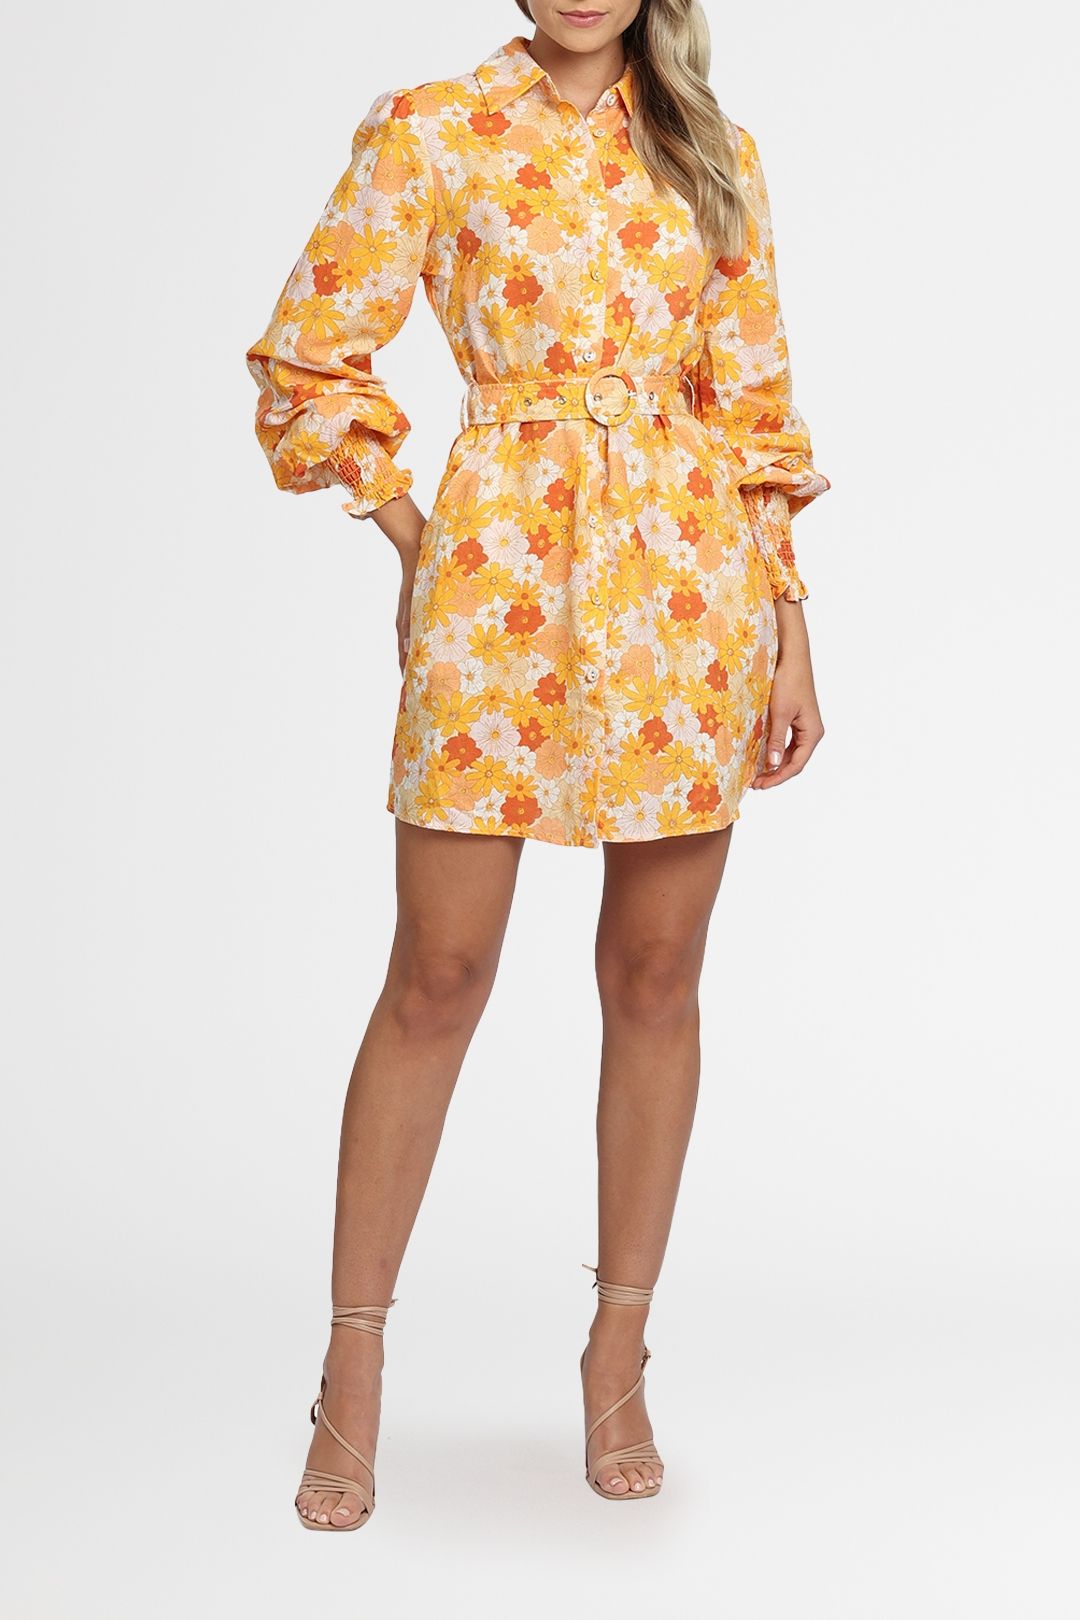 Charlie Holiday Jagger Dress Seventies Floral